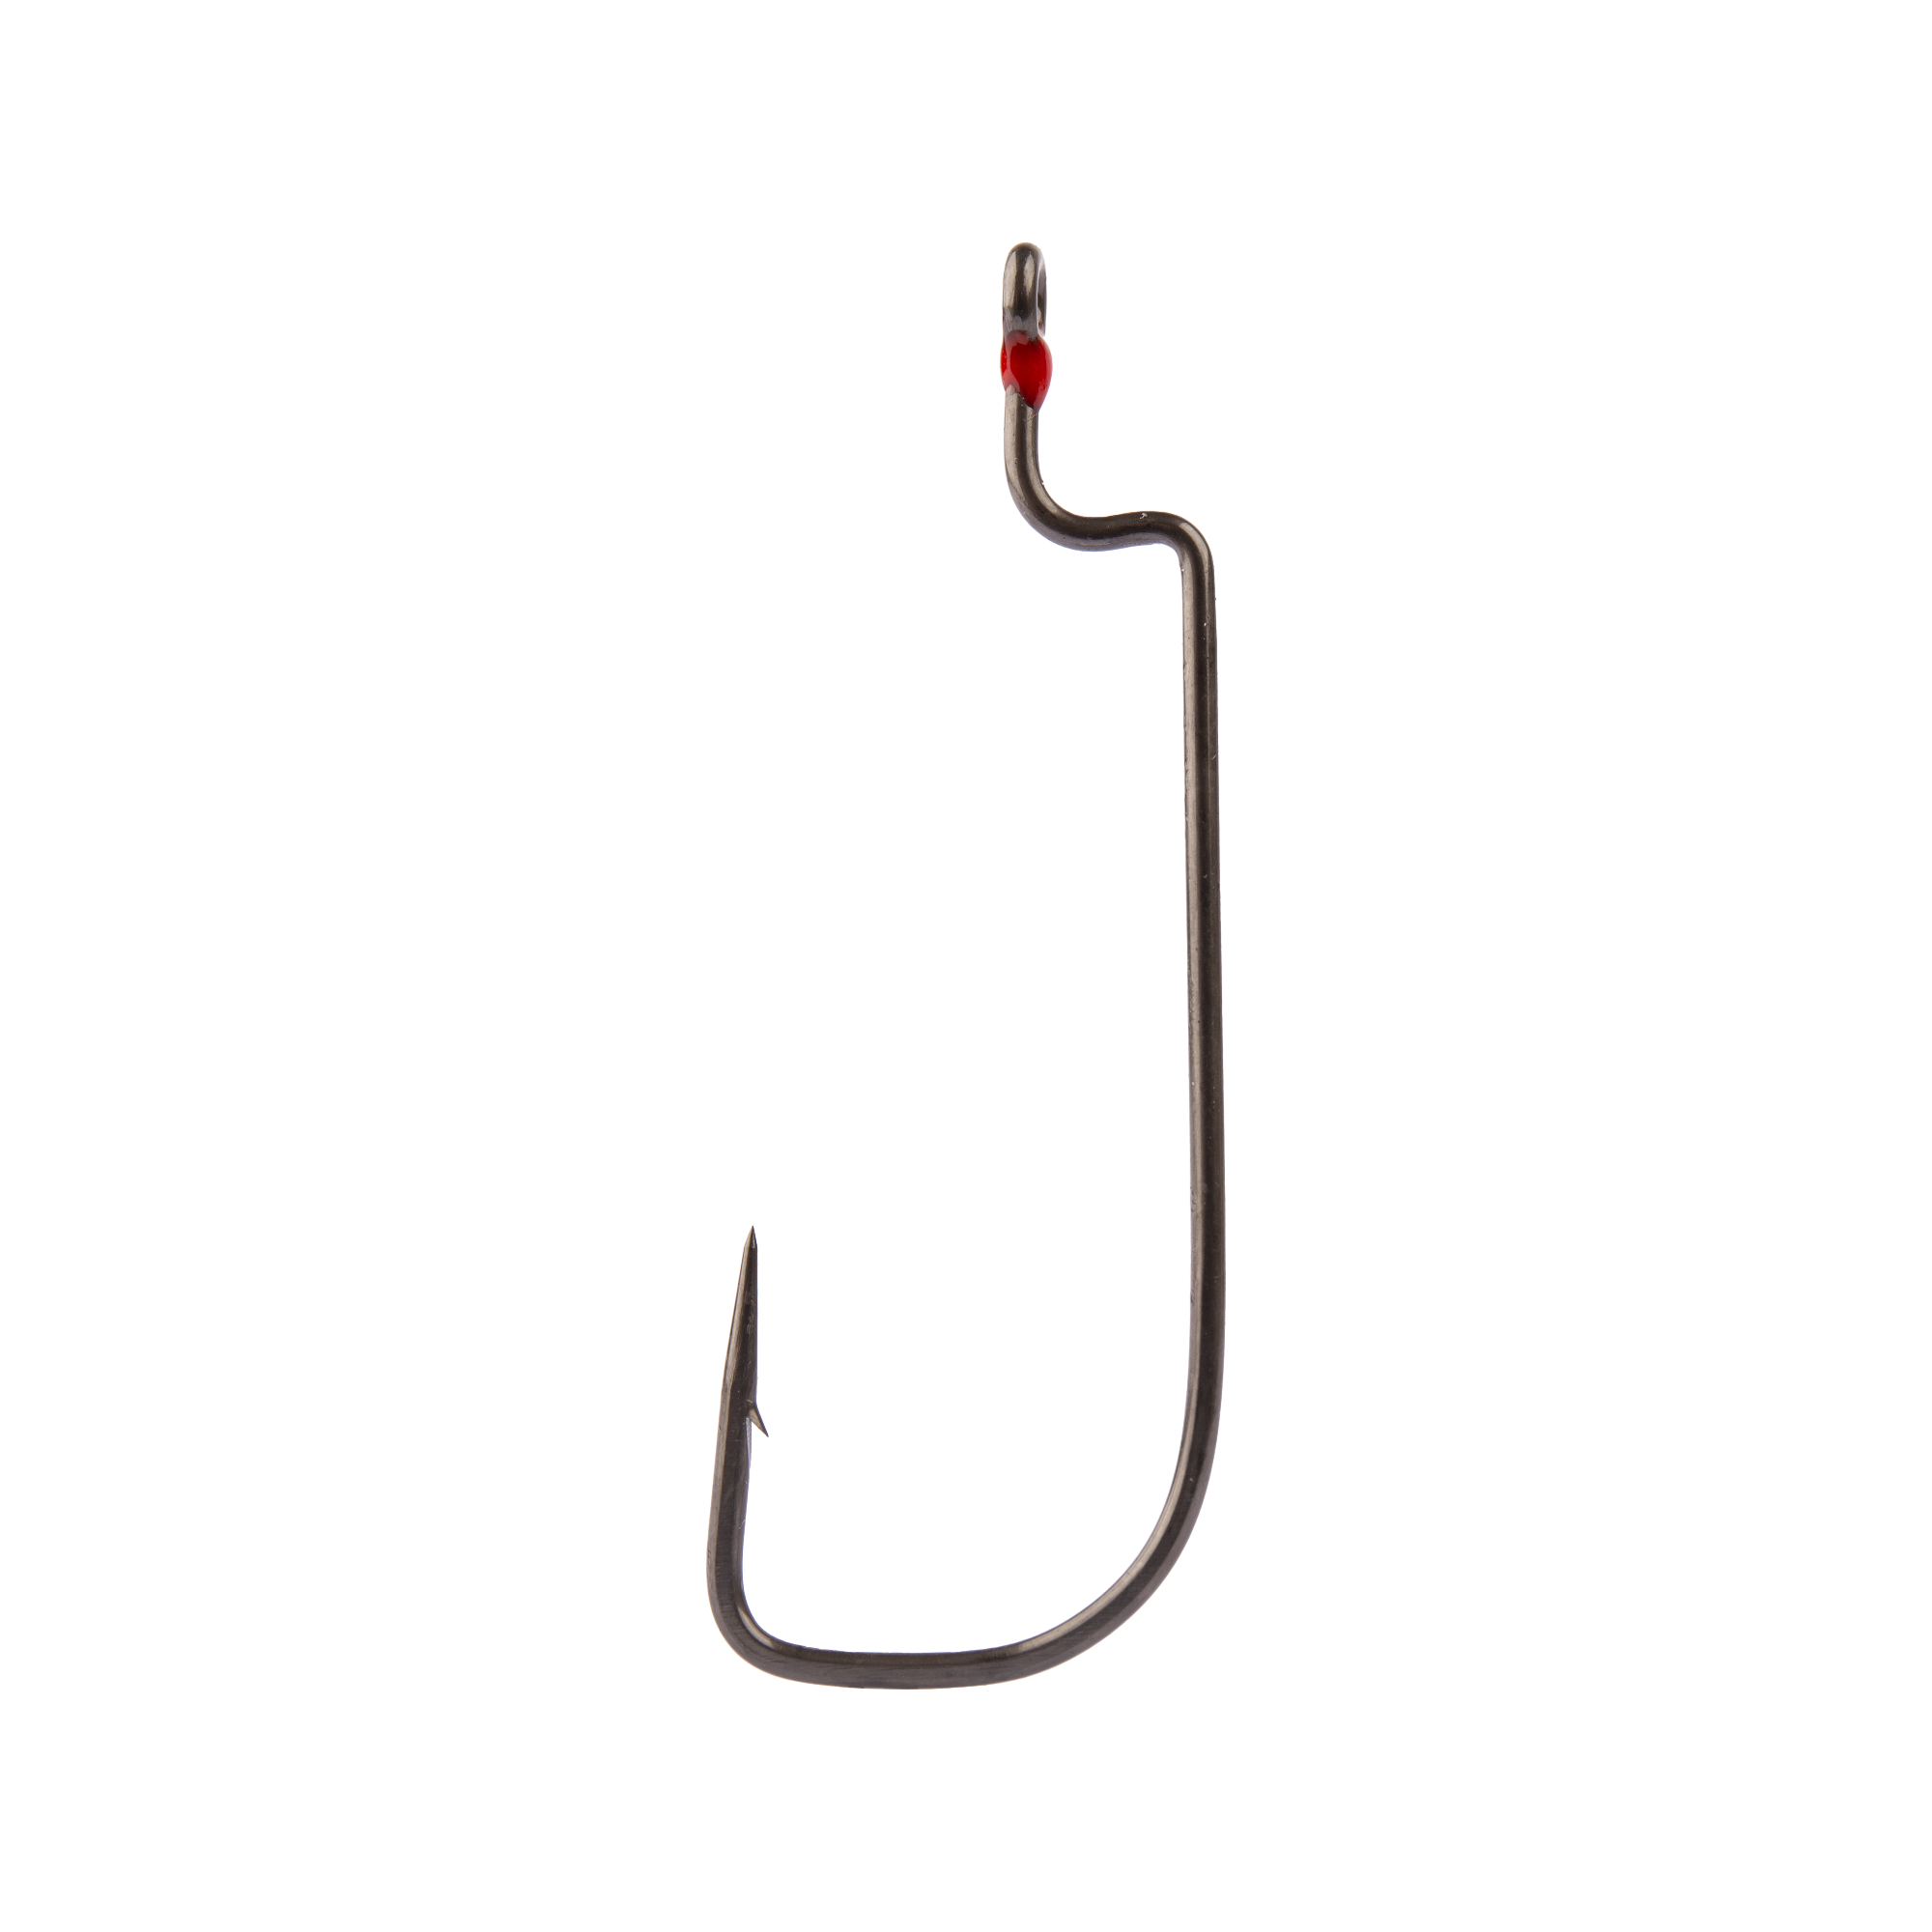 Mustad Redefines the Traditional Worm Hook